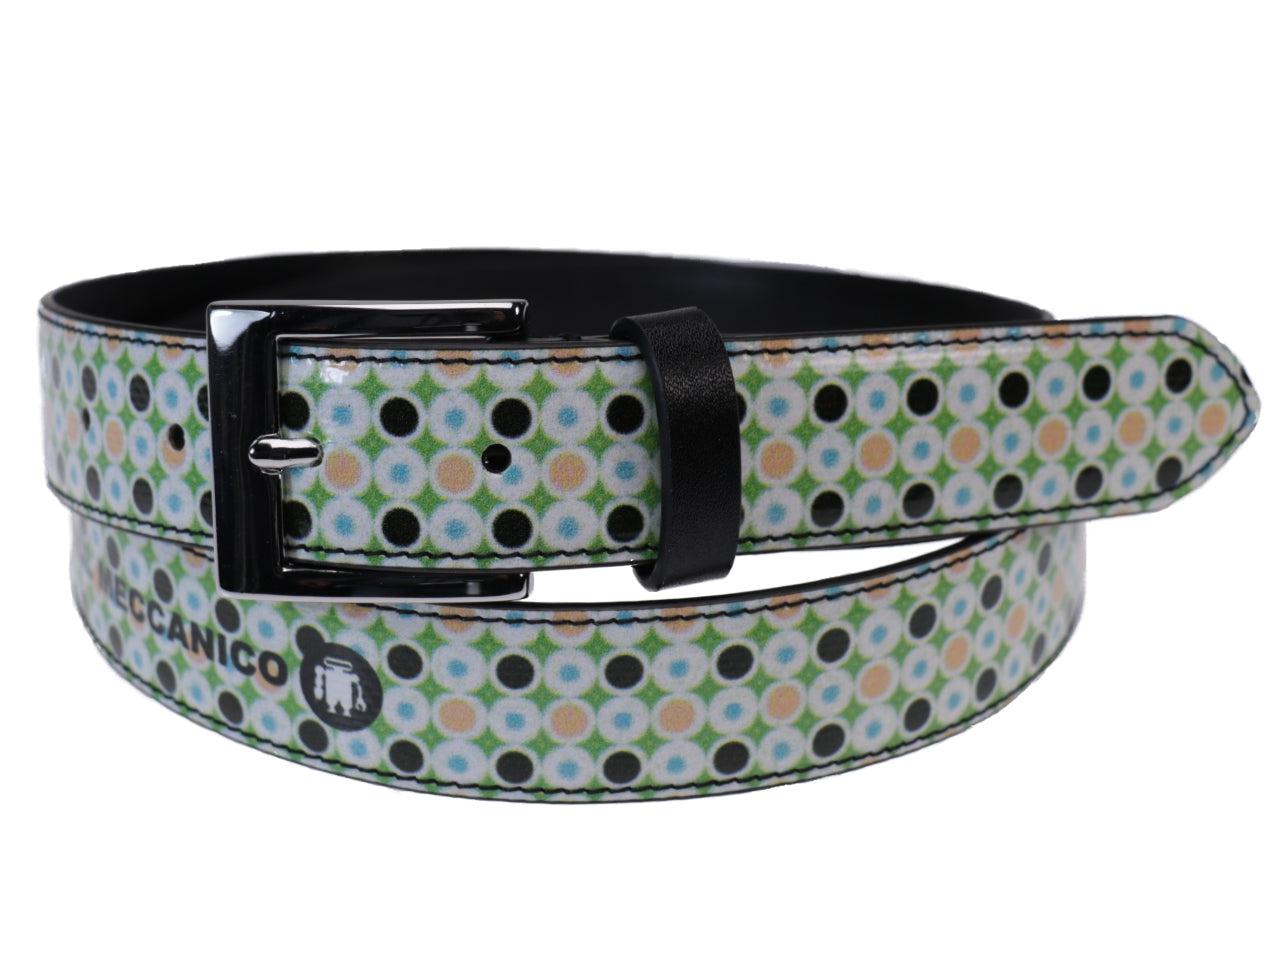 WOMAN'S BELT GREEN WITH DOTS FANTASY MADE OF LORRY TARPAULIN. - Unique Pieces Paul Meccanico